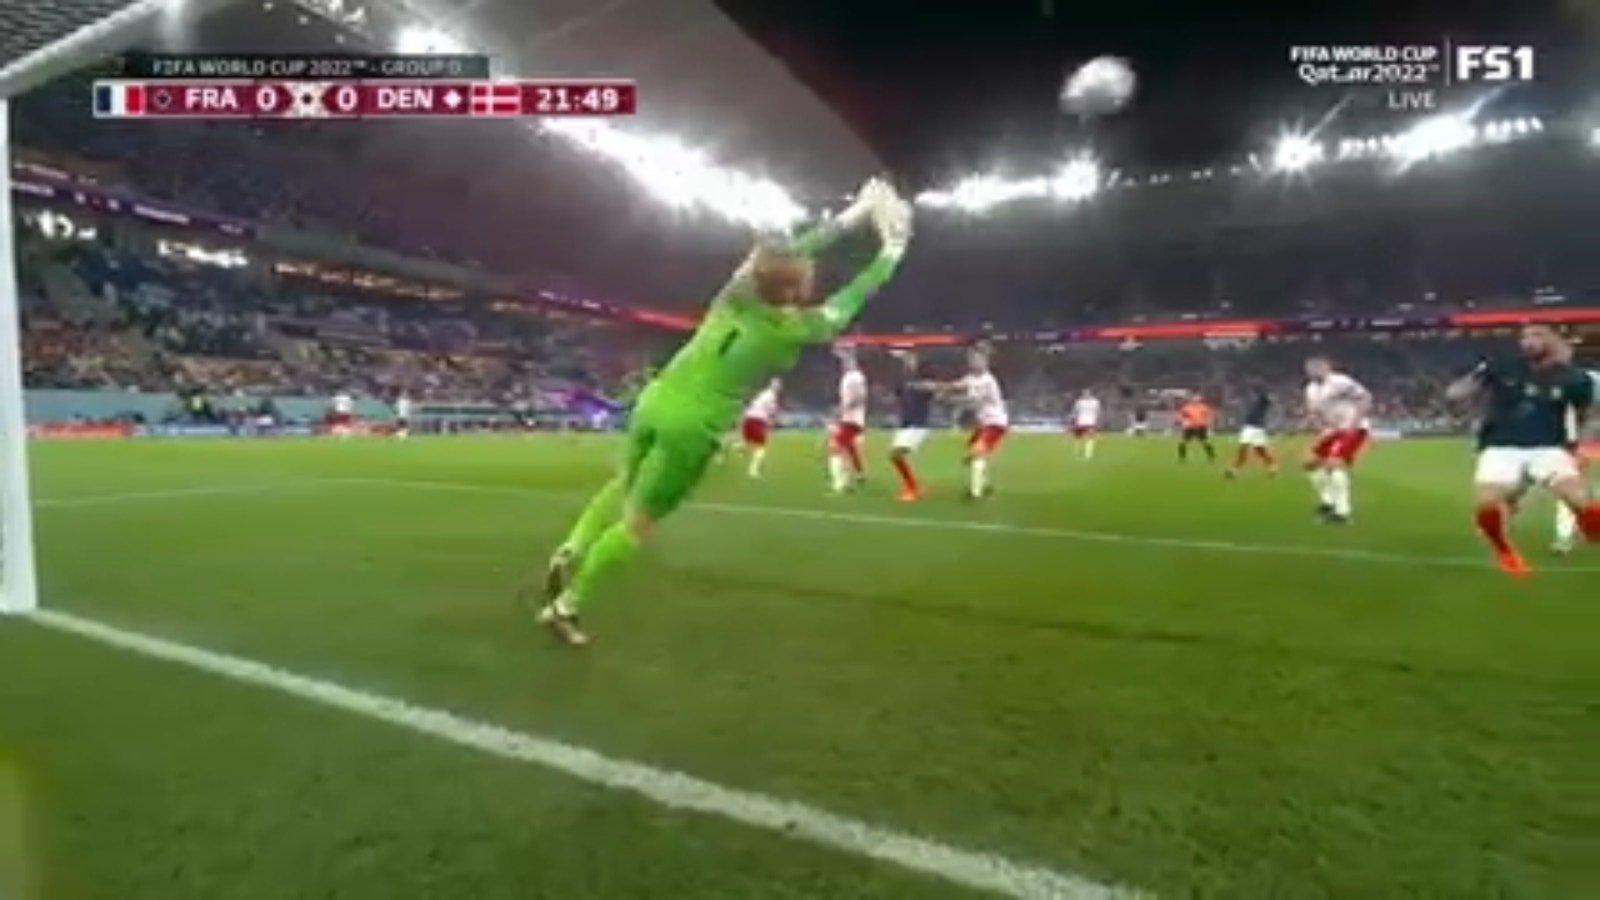 Kasper Schmeichel makes great saves to keep Denmark and France scoreless